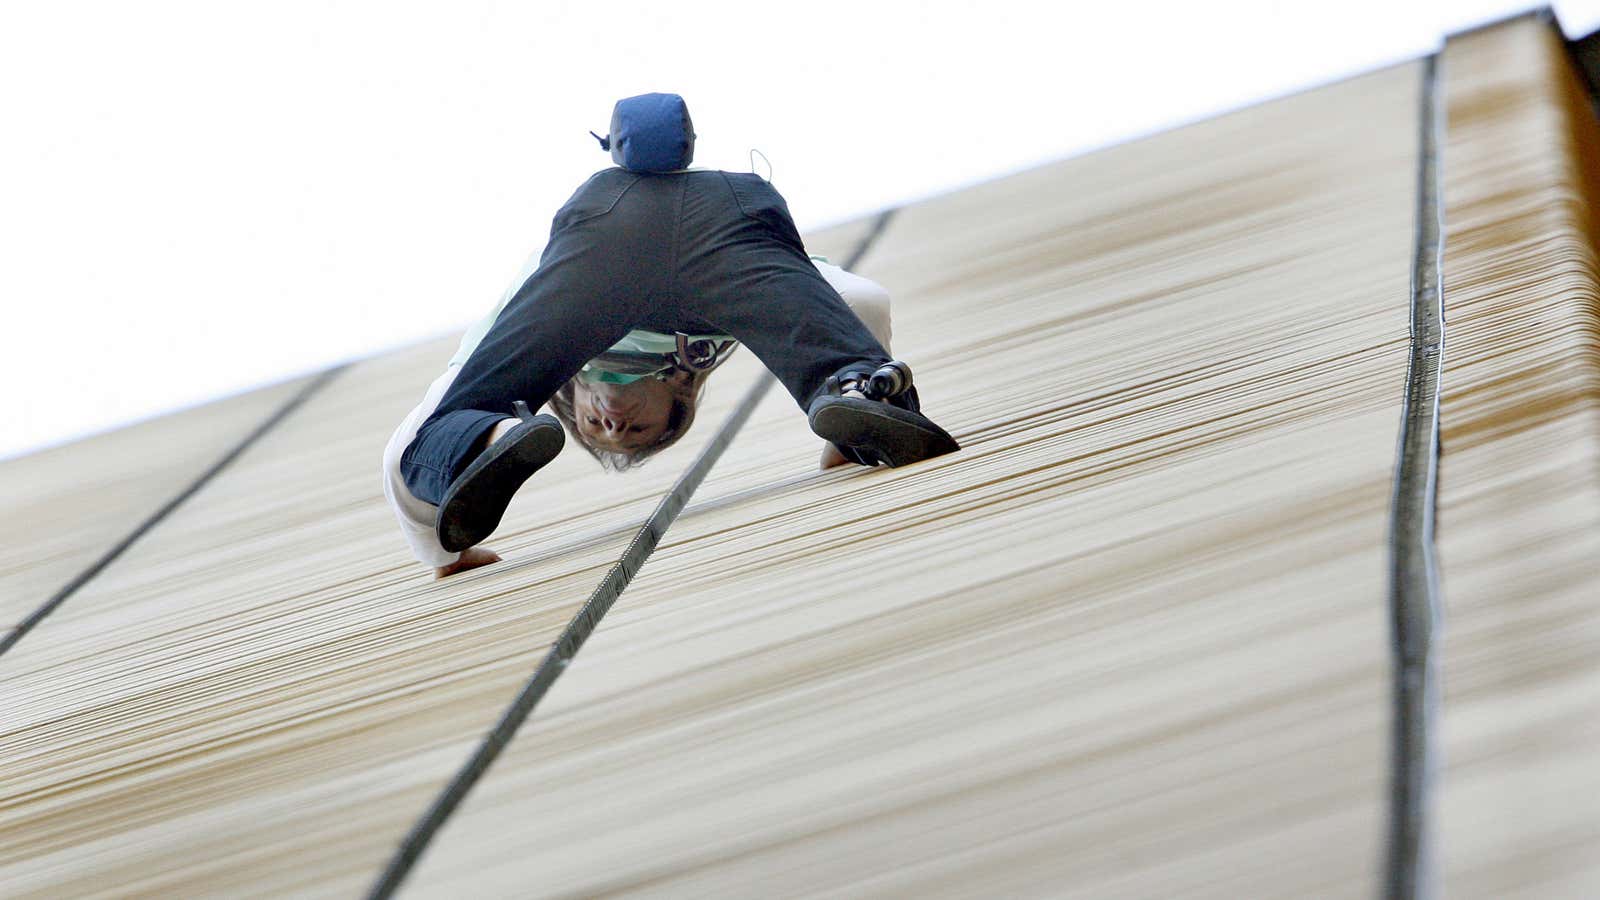 A man climbs an office tower in Berlin. Some investors feel their struggle to buy distressed assets is just as hard.